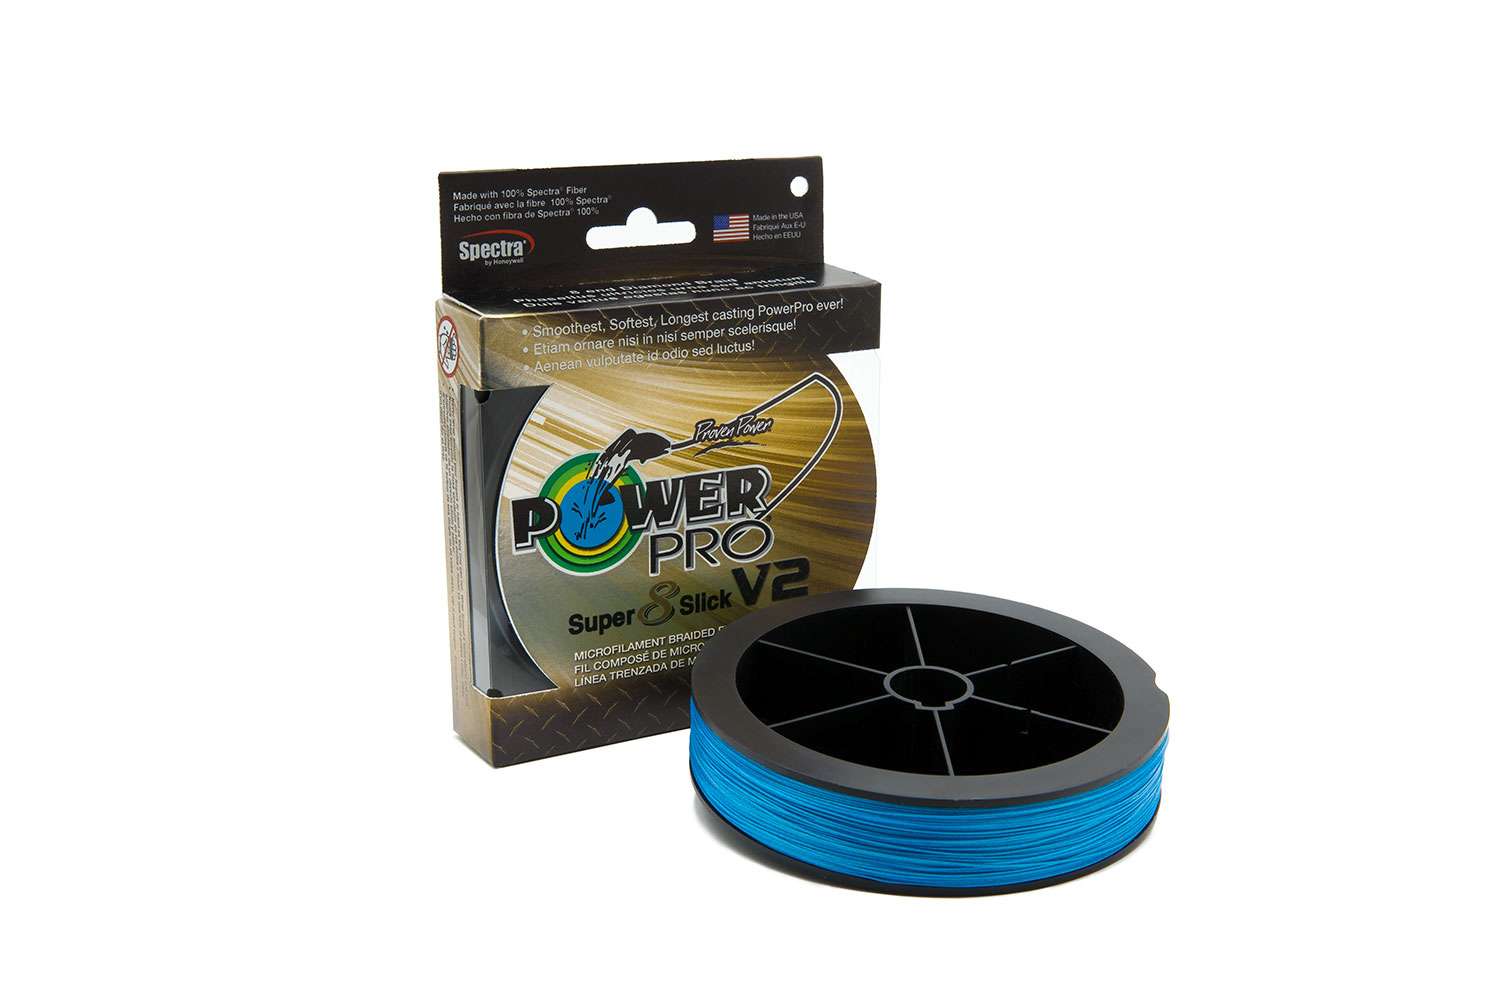 <p><b>PowerPro Super8Slick V2, $20.99-$199.99</b></p> Re-engineered with added abrasion toughness so anglers can rip through the heaviest cover with the same force as standard four-end braids, the new PowerPro Super8Slick V2 braided fishing line combines a new eight-end dense weave fiber construction with proven âEnhanced Body Technologyâ (EBT) process. The new braid is offered in nine different pound test designations, and in five spool sizes to fill from one reel, to bulk spools for multiple fills and for reel spooling by your local tackle shop.</p> <p> Targeting both bass anglers with âcamouflage-typeâ colors and the inshore/offshore market with colors to fish both stained and clear water, the new Super8Slick V2 braid is offered in PowerProâs well known moss green for all-around use, onyx (black) for those looking to target big bass, hi-vis aqua green for visibility-minded anglers and when fishing over soft cover, and blue, a color preferred for many in saltwater, and a growing number of bass anglers. All four colors are offered in 8-, 10-, 15-, 20, 30-, 40-, 50-, 65- and 80-pound test (from 1-pound test to 18-pound test mono diameter equivalent), and in 100-, 150- and 300-yards spools and 1,500- and 3,000-yard bulk filler spools. <br> <a href=